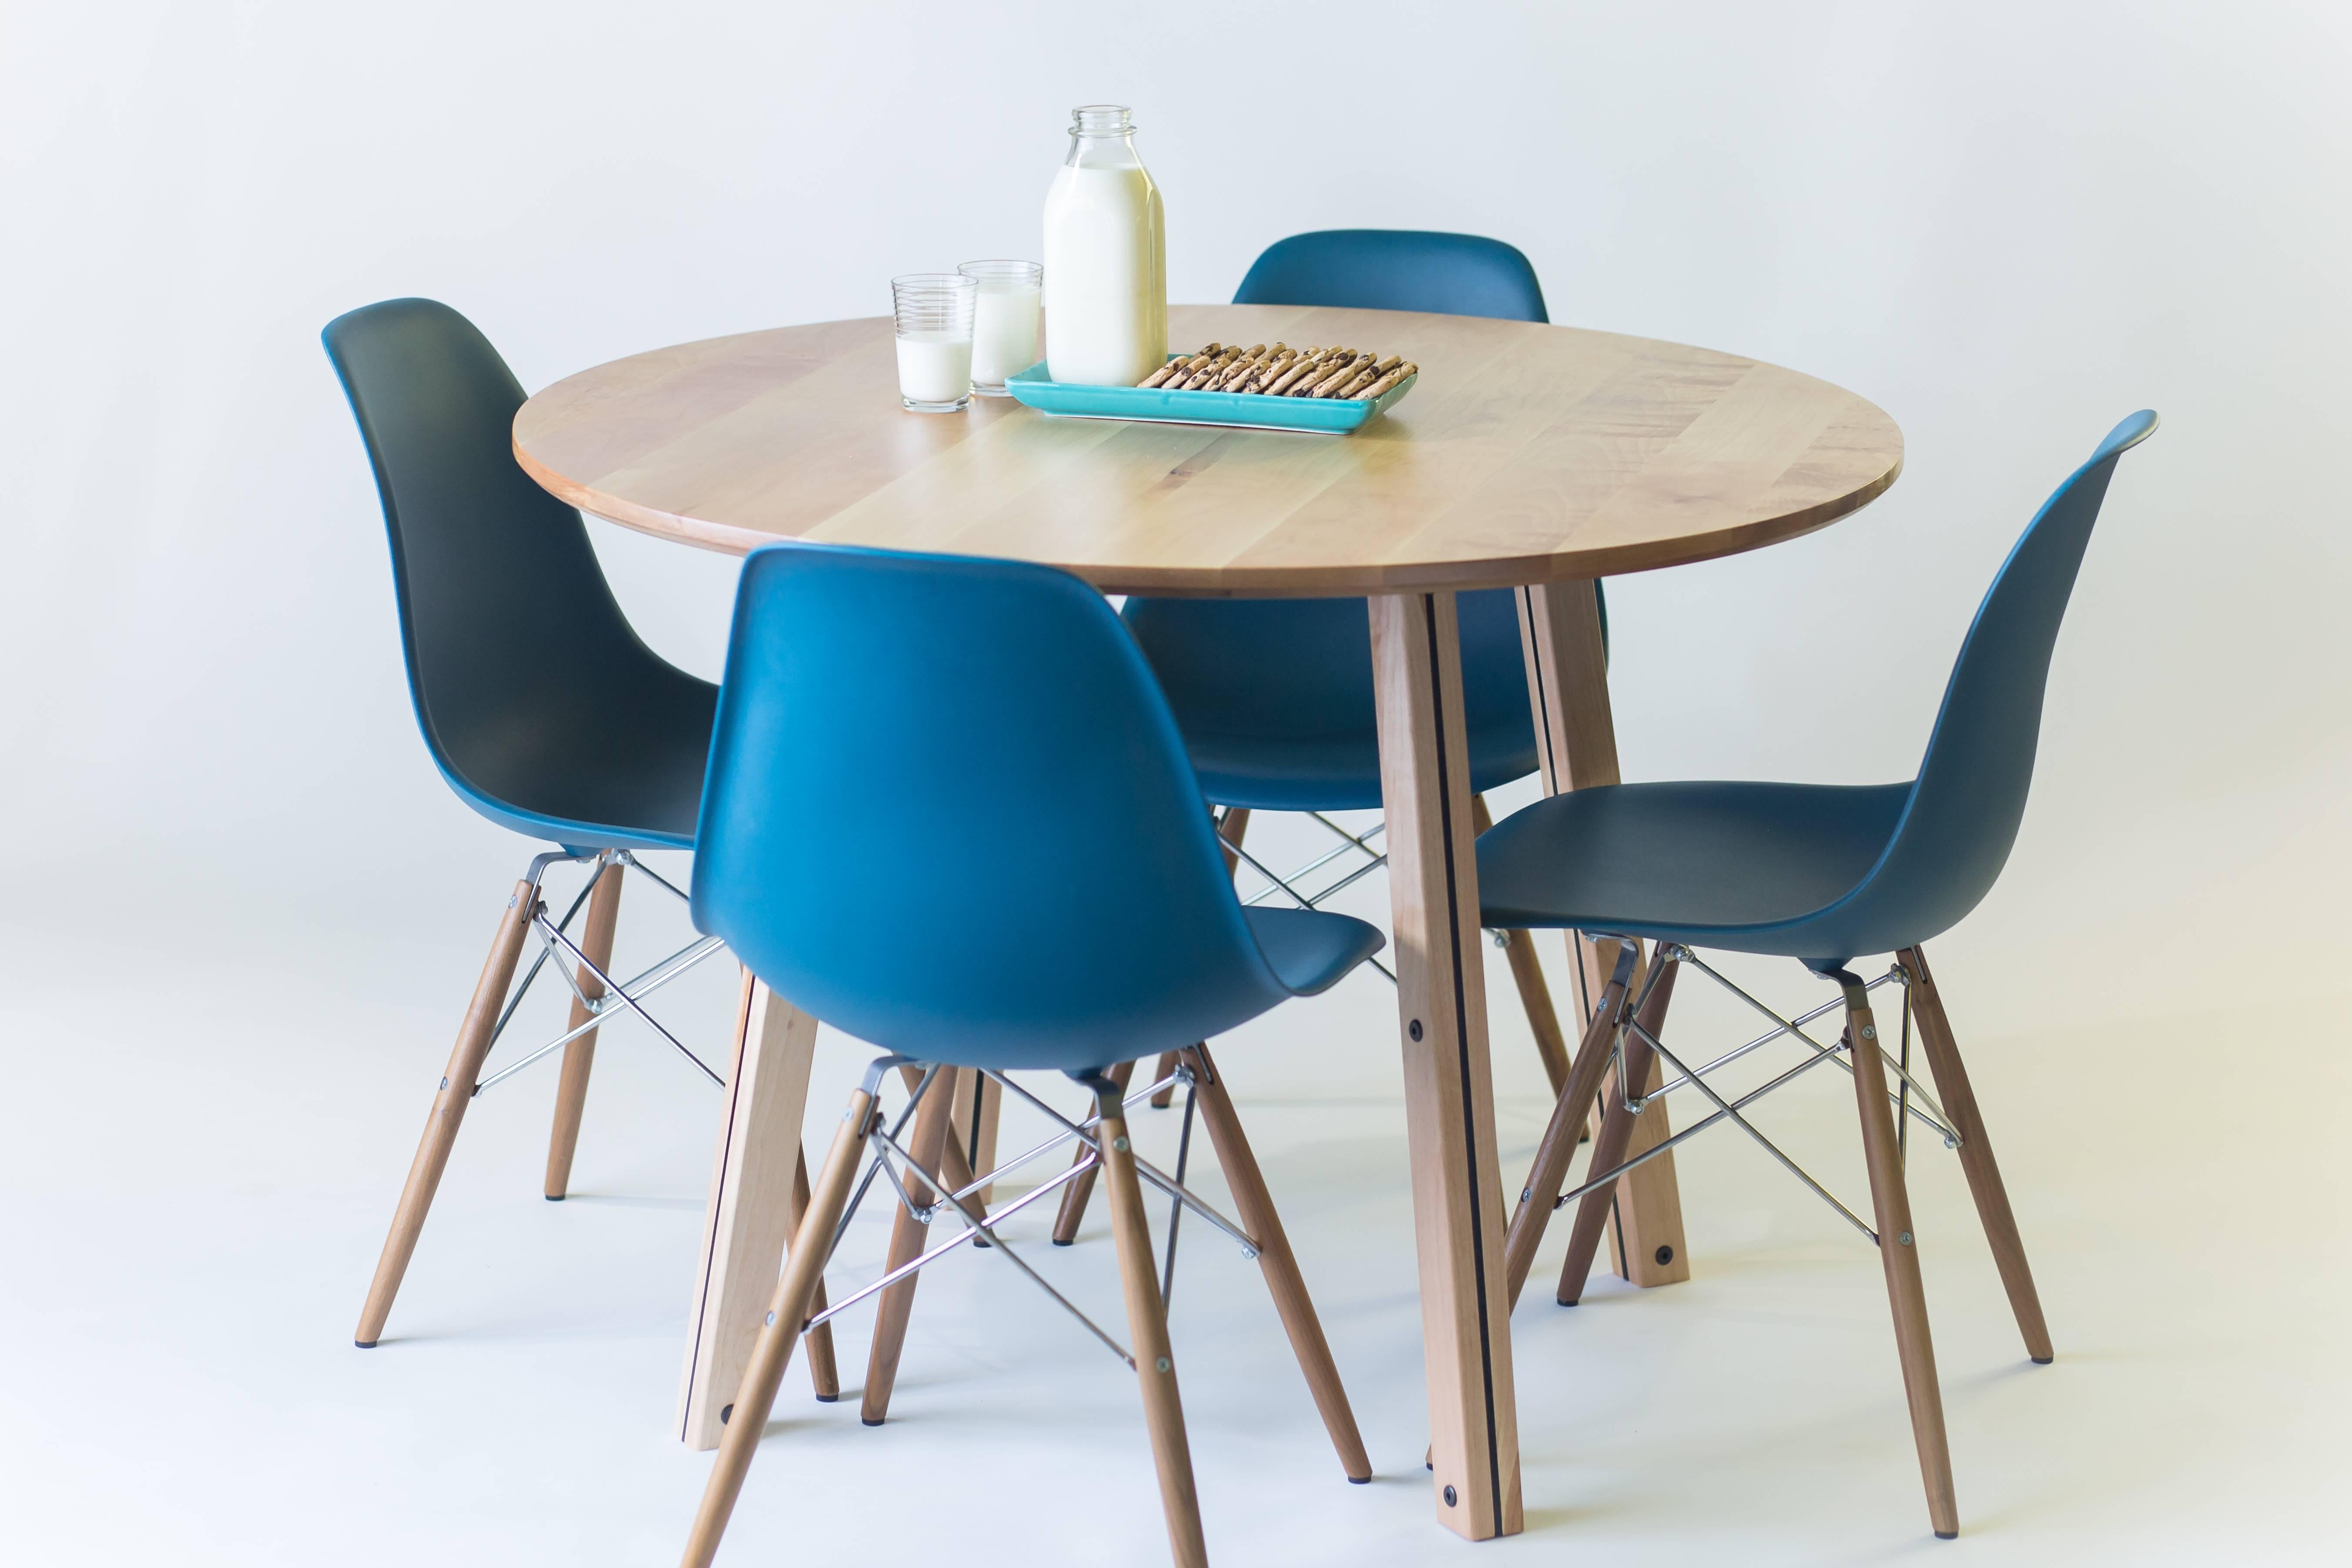 The Crux, Modern Birch and Powder Coated Steel Round Dining Table.

Made from solid birch and steel, the Crux is our nod to the Mid-Century bistro table. This simple and elegant design seats four comfortably with room to spare. 
Available in custom